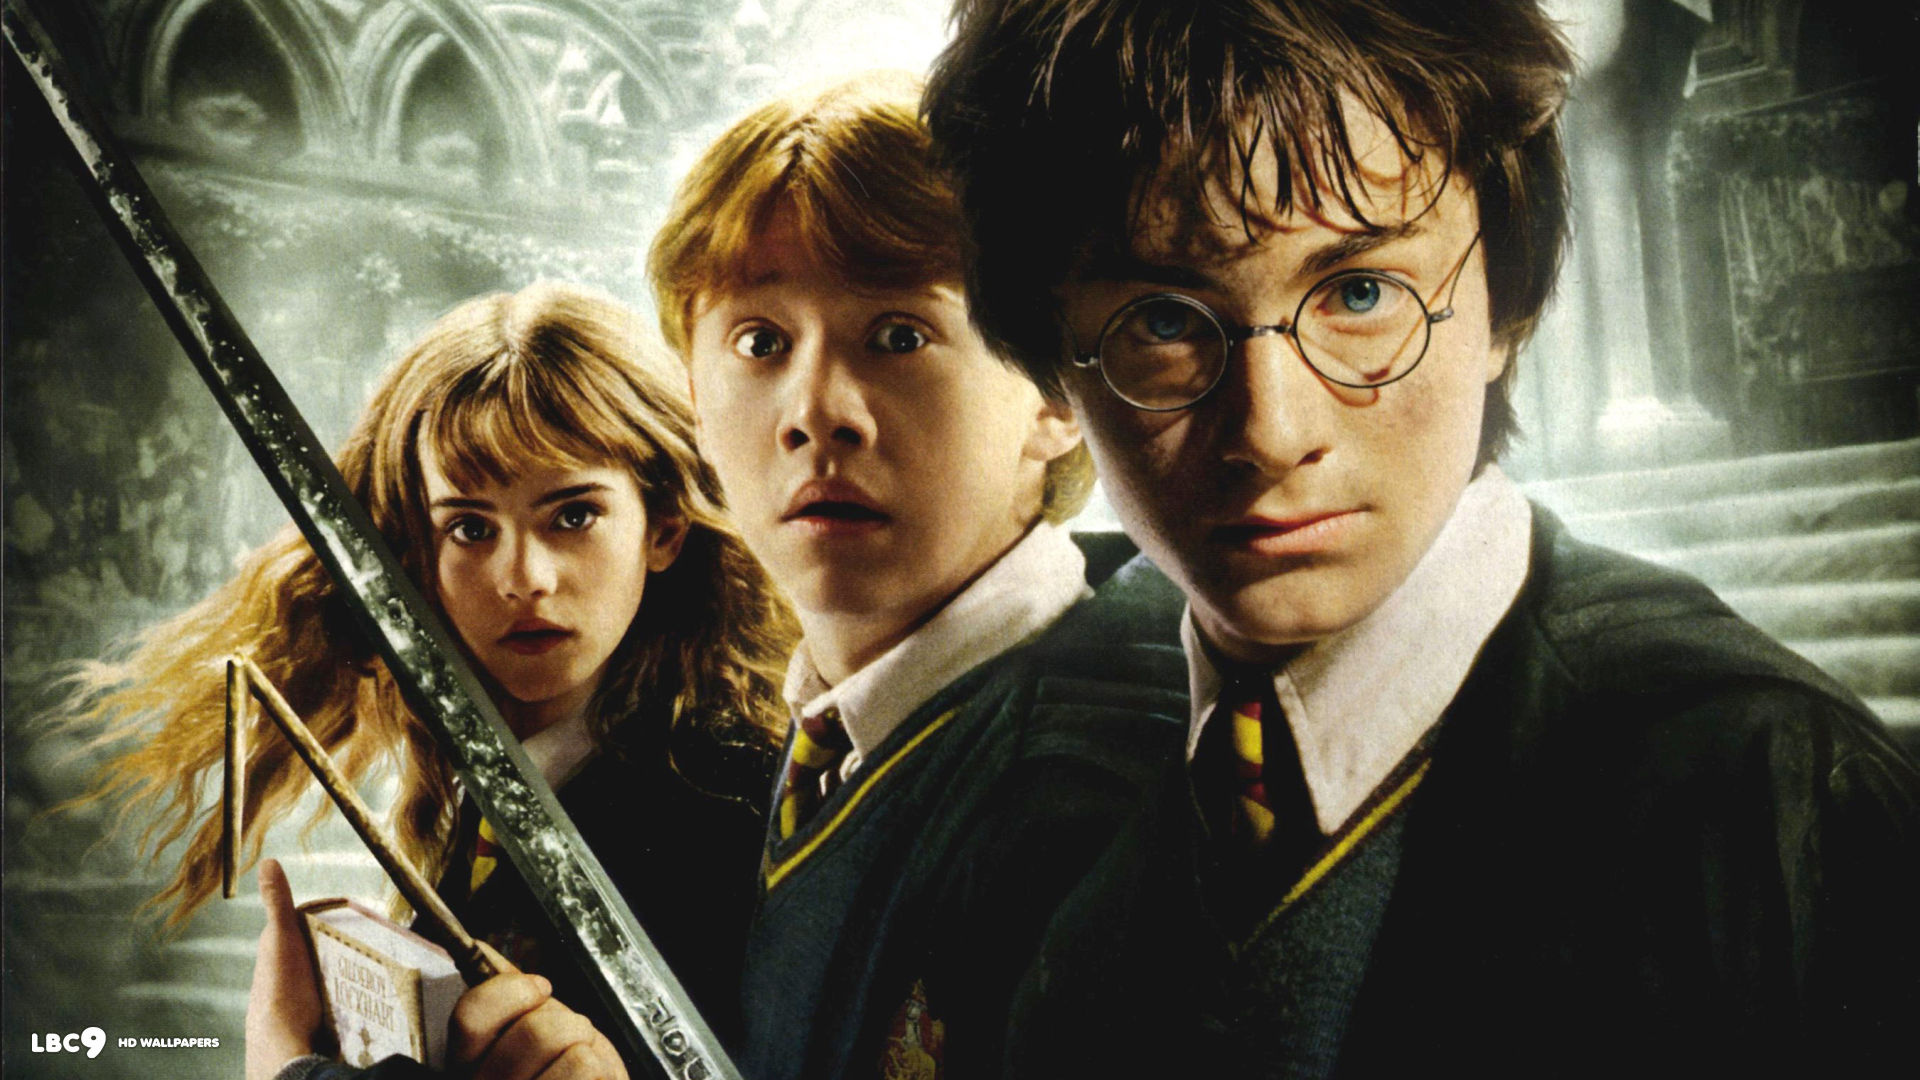 Chris Columbus, Chamber of Secrets, From page to screen, 1920x1080 Full HD Desktop